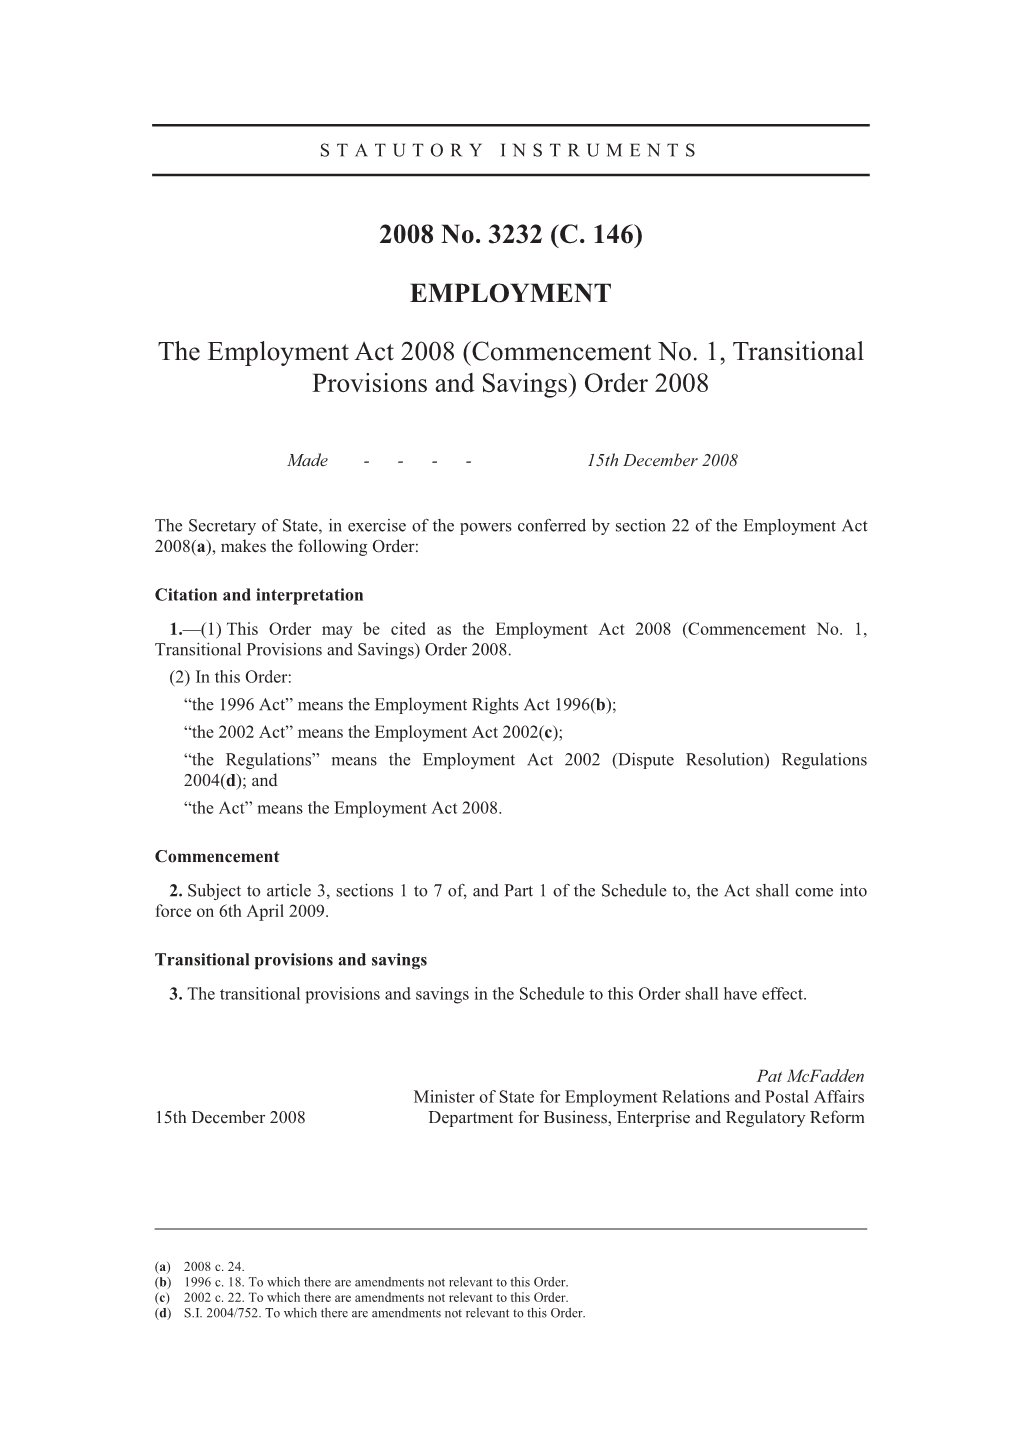 (Commencement No. 1, Transitional Provisions and Savings) Order 2008